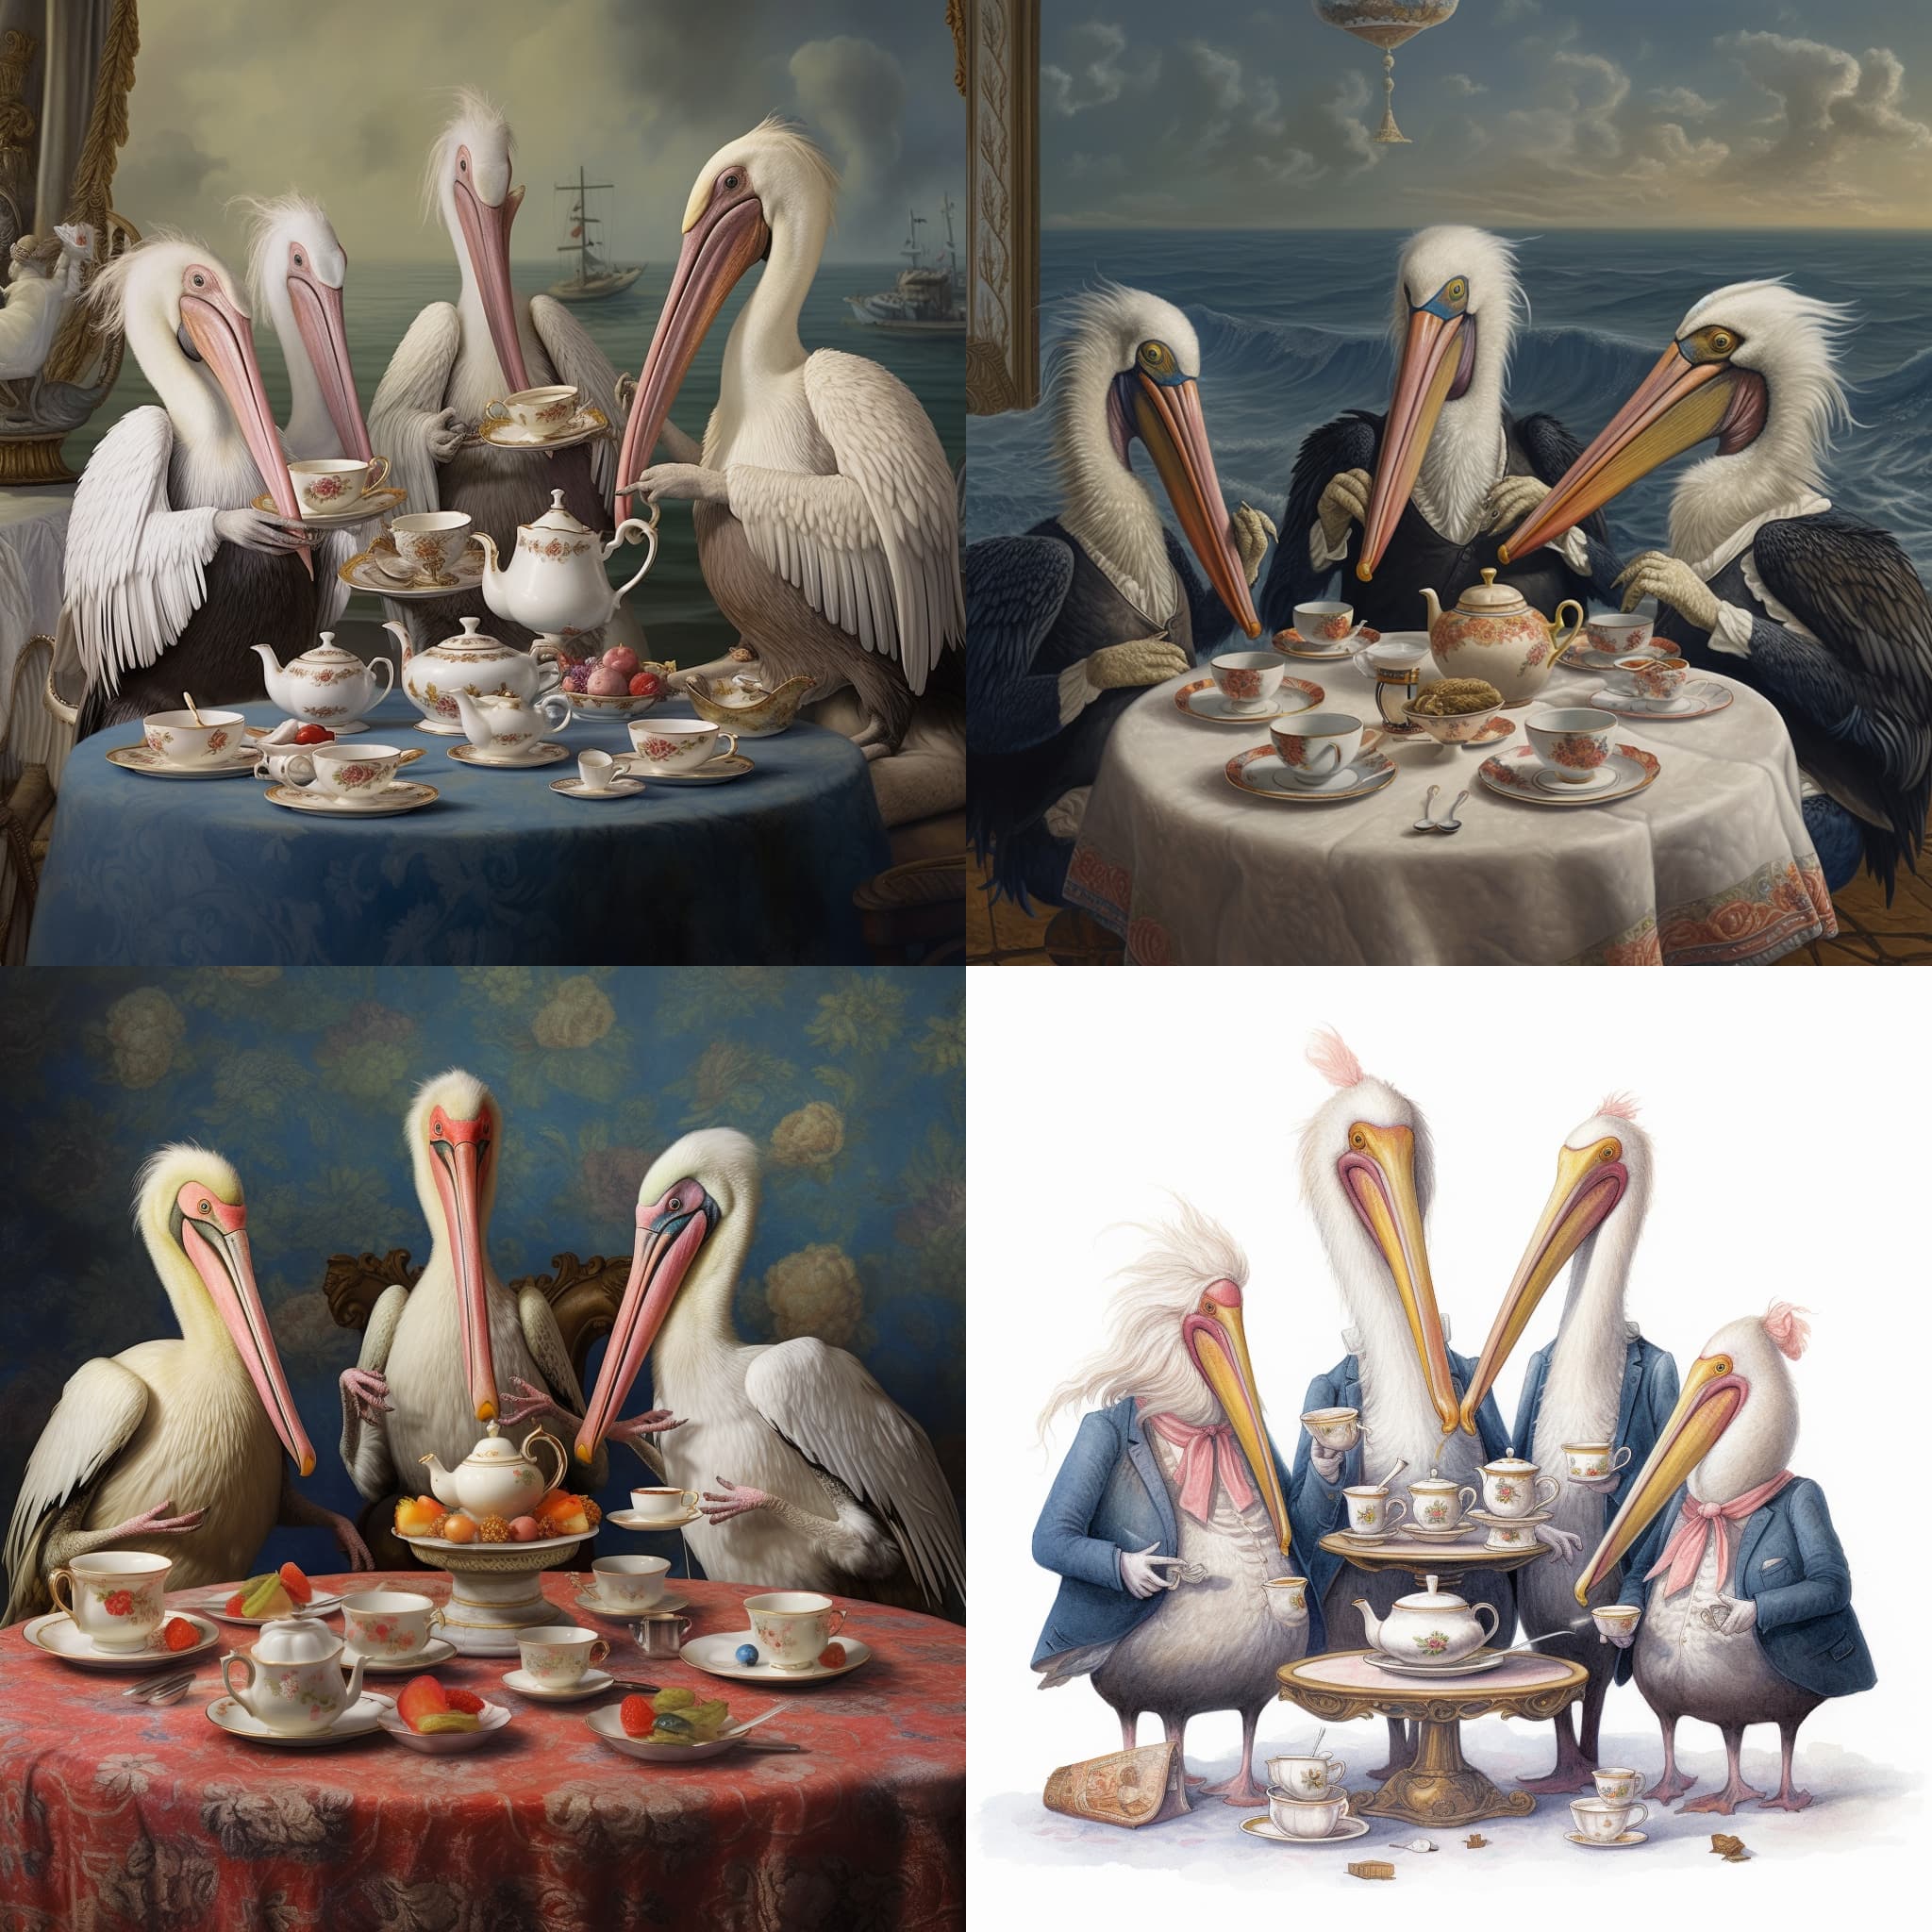 Four images of pelicans having a tea party. These look a bit more like illustrations - they are more whimsical, in formal settings and the pelicans often have little hands - sometimes white, sometimes pink claws - to hold the tea with.